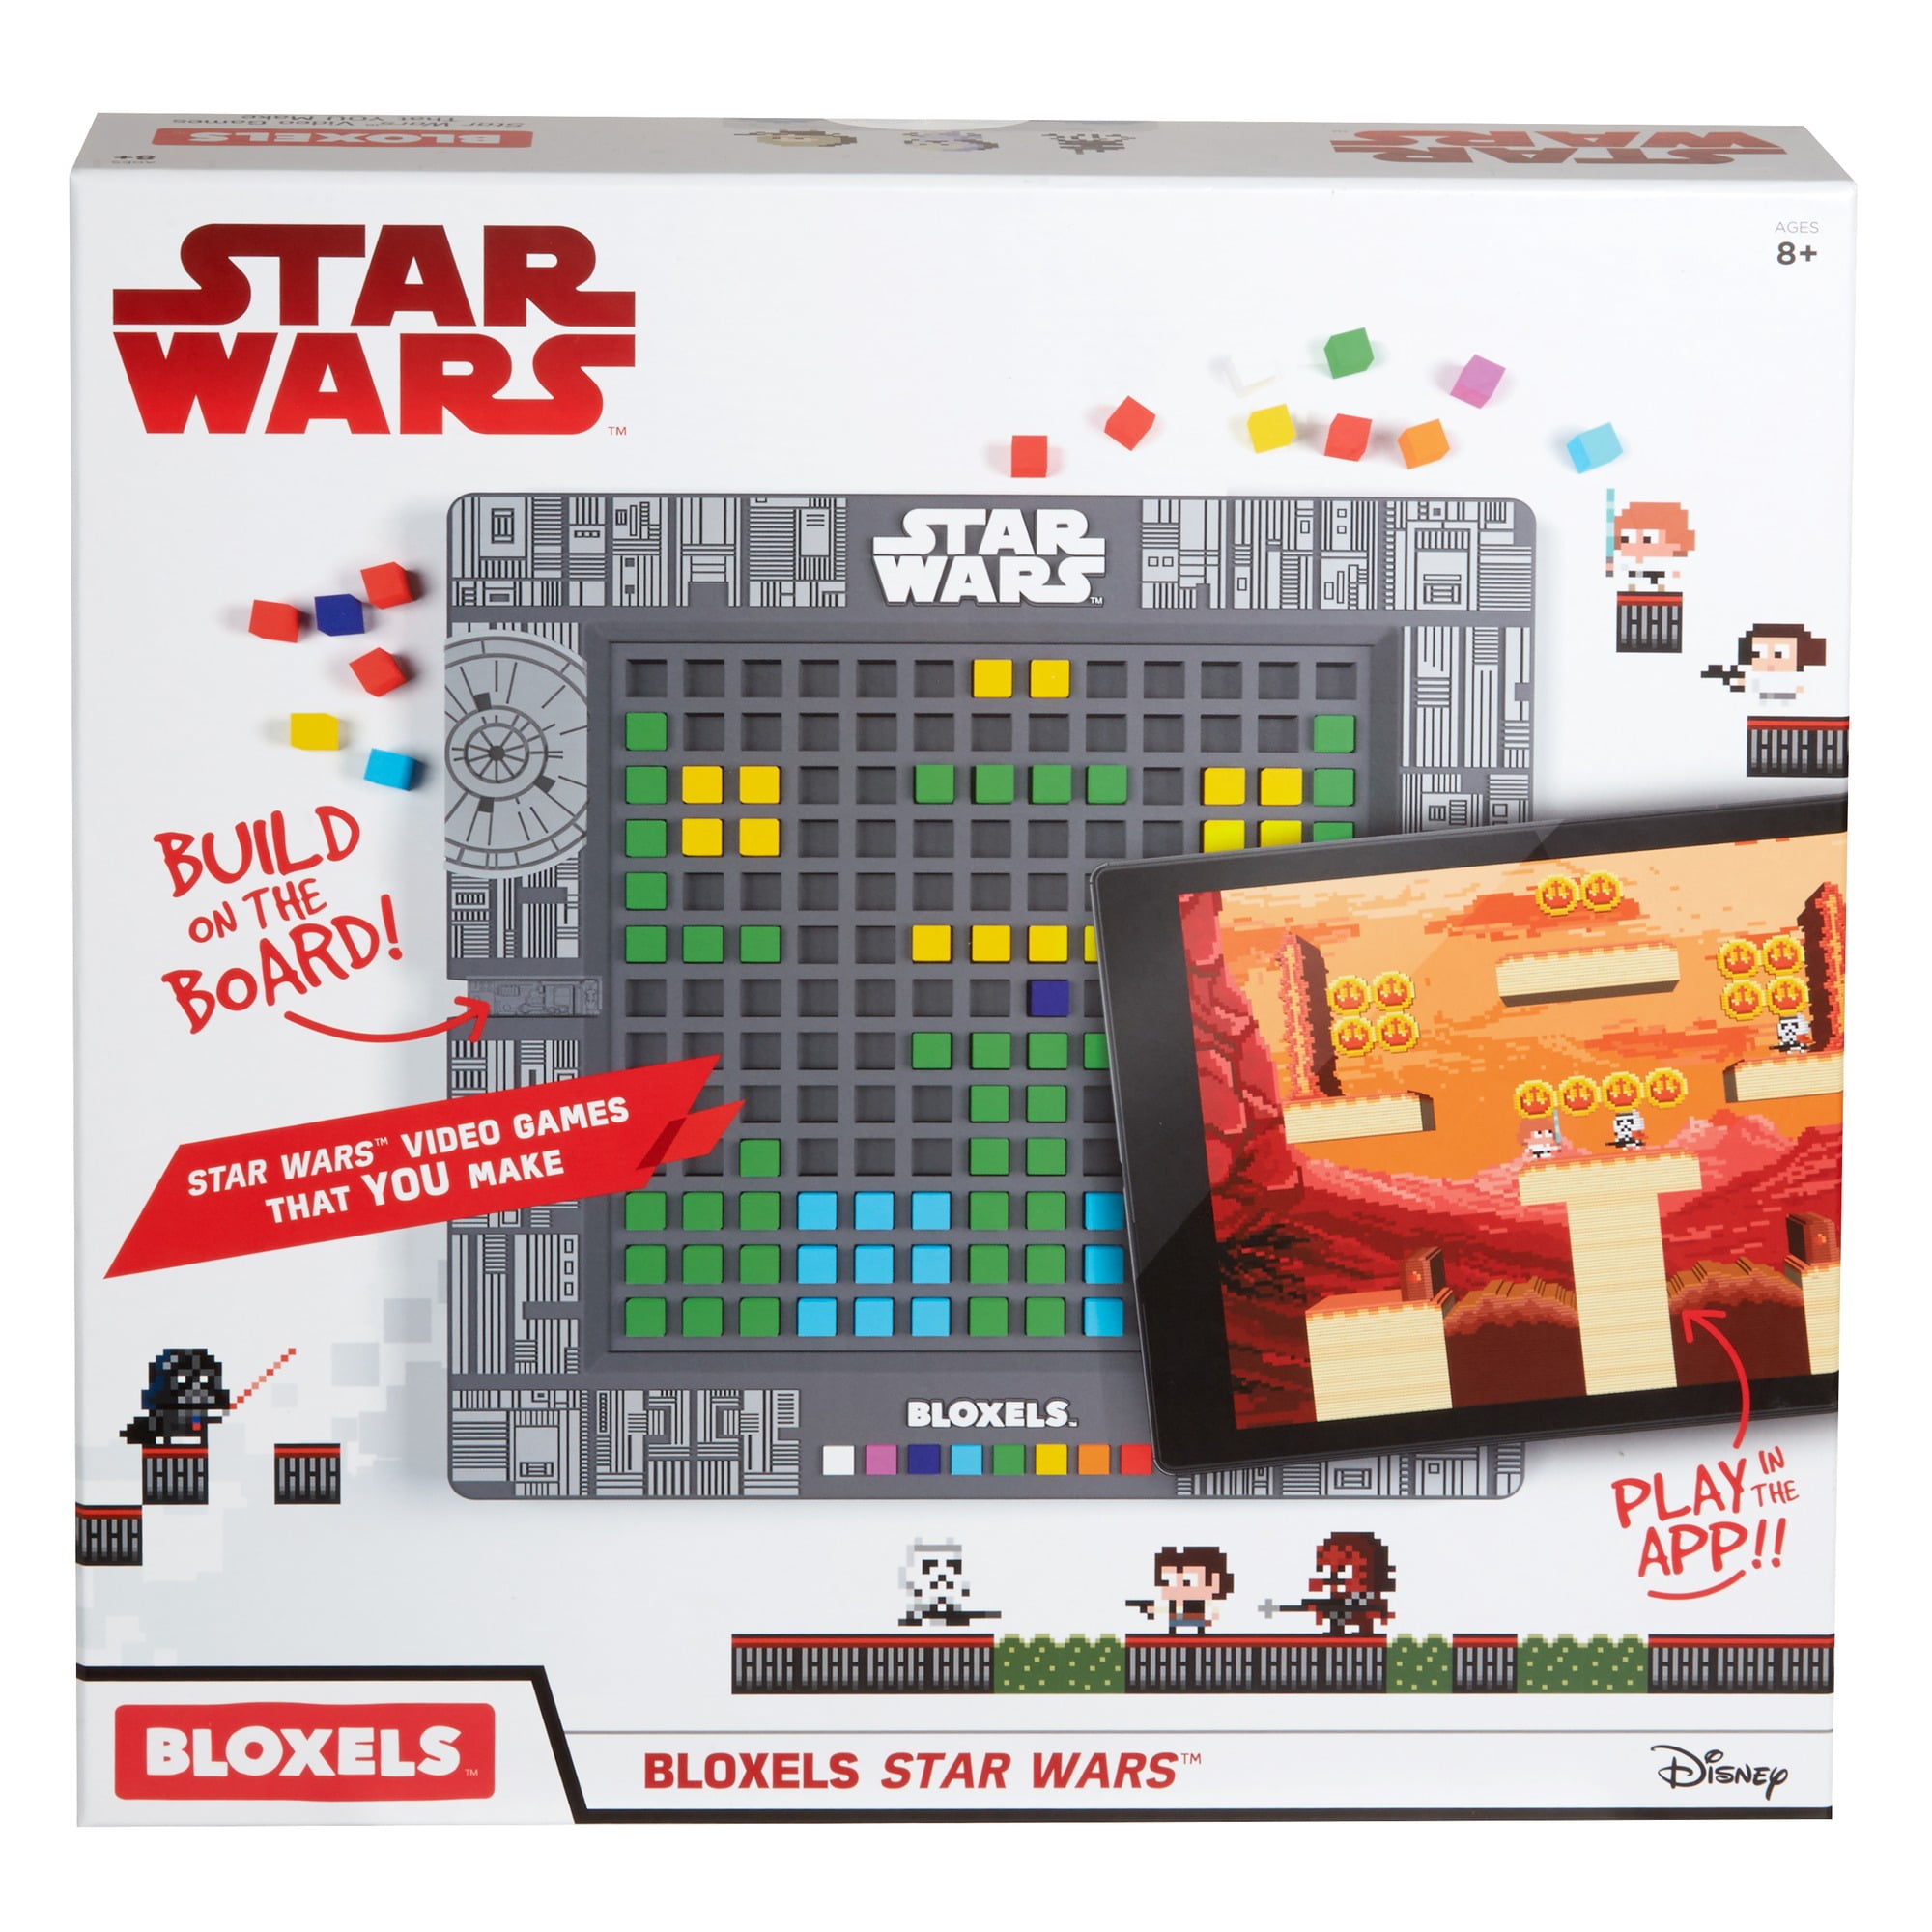 MATTEL Bloxels Build Your Own Video Game Starter Kit Build On Board Play In App